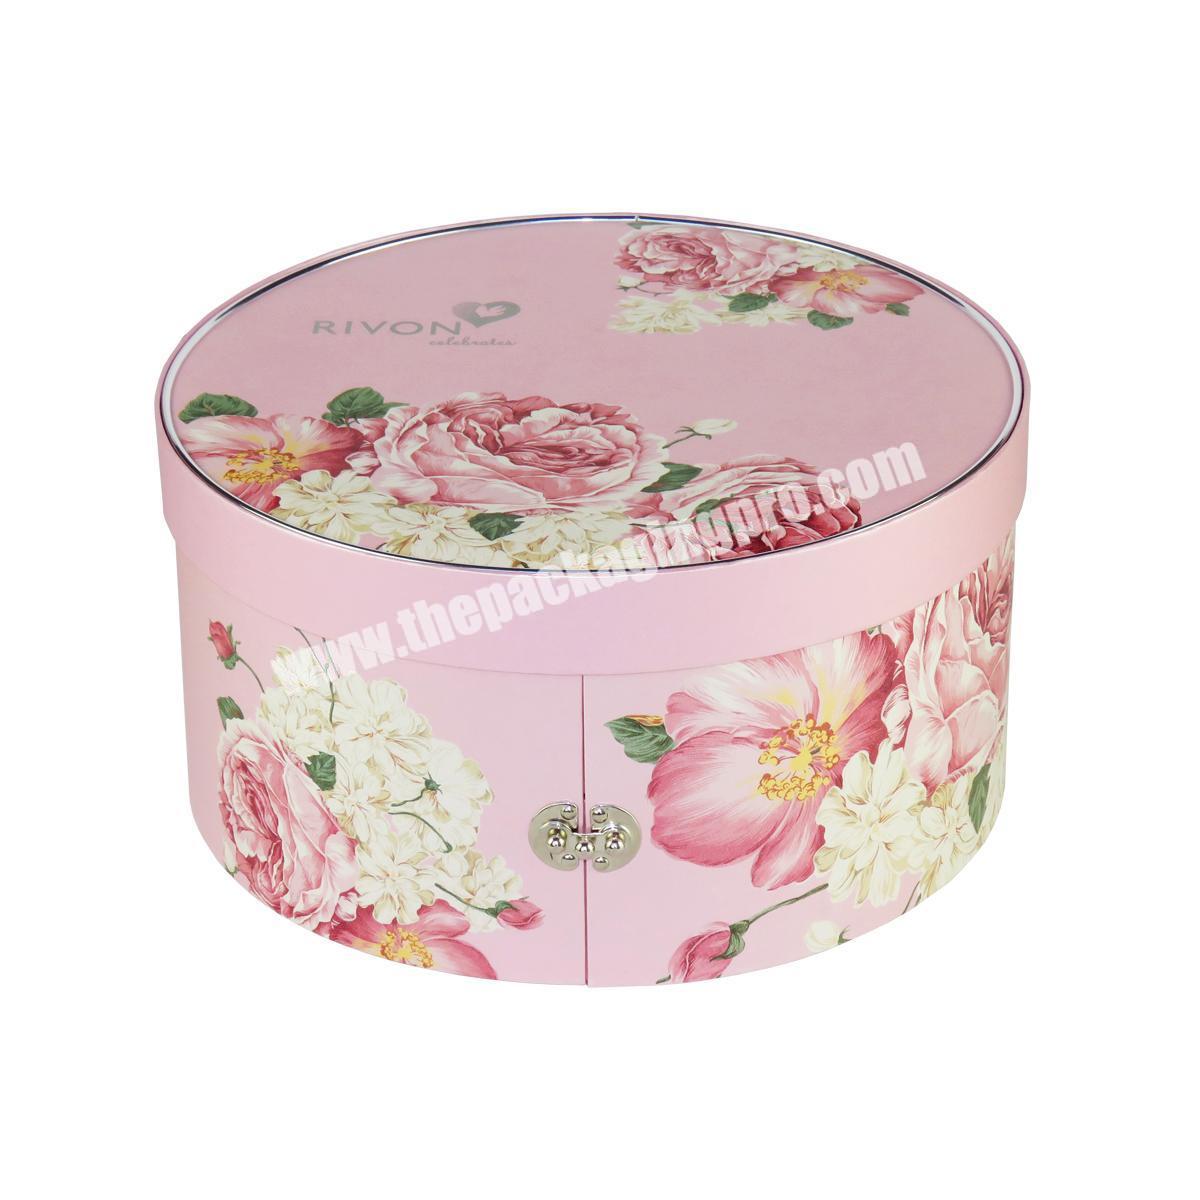 Creative Gift Two Round Tube Forever Love Candy Mooncake Biscuits Cookies 2 Layers Packaging Box